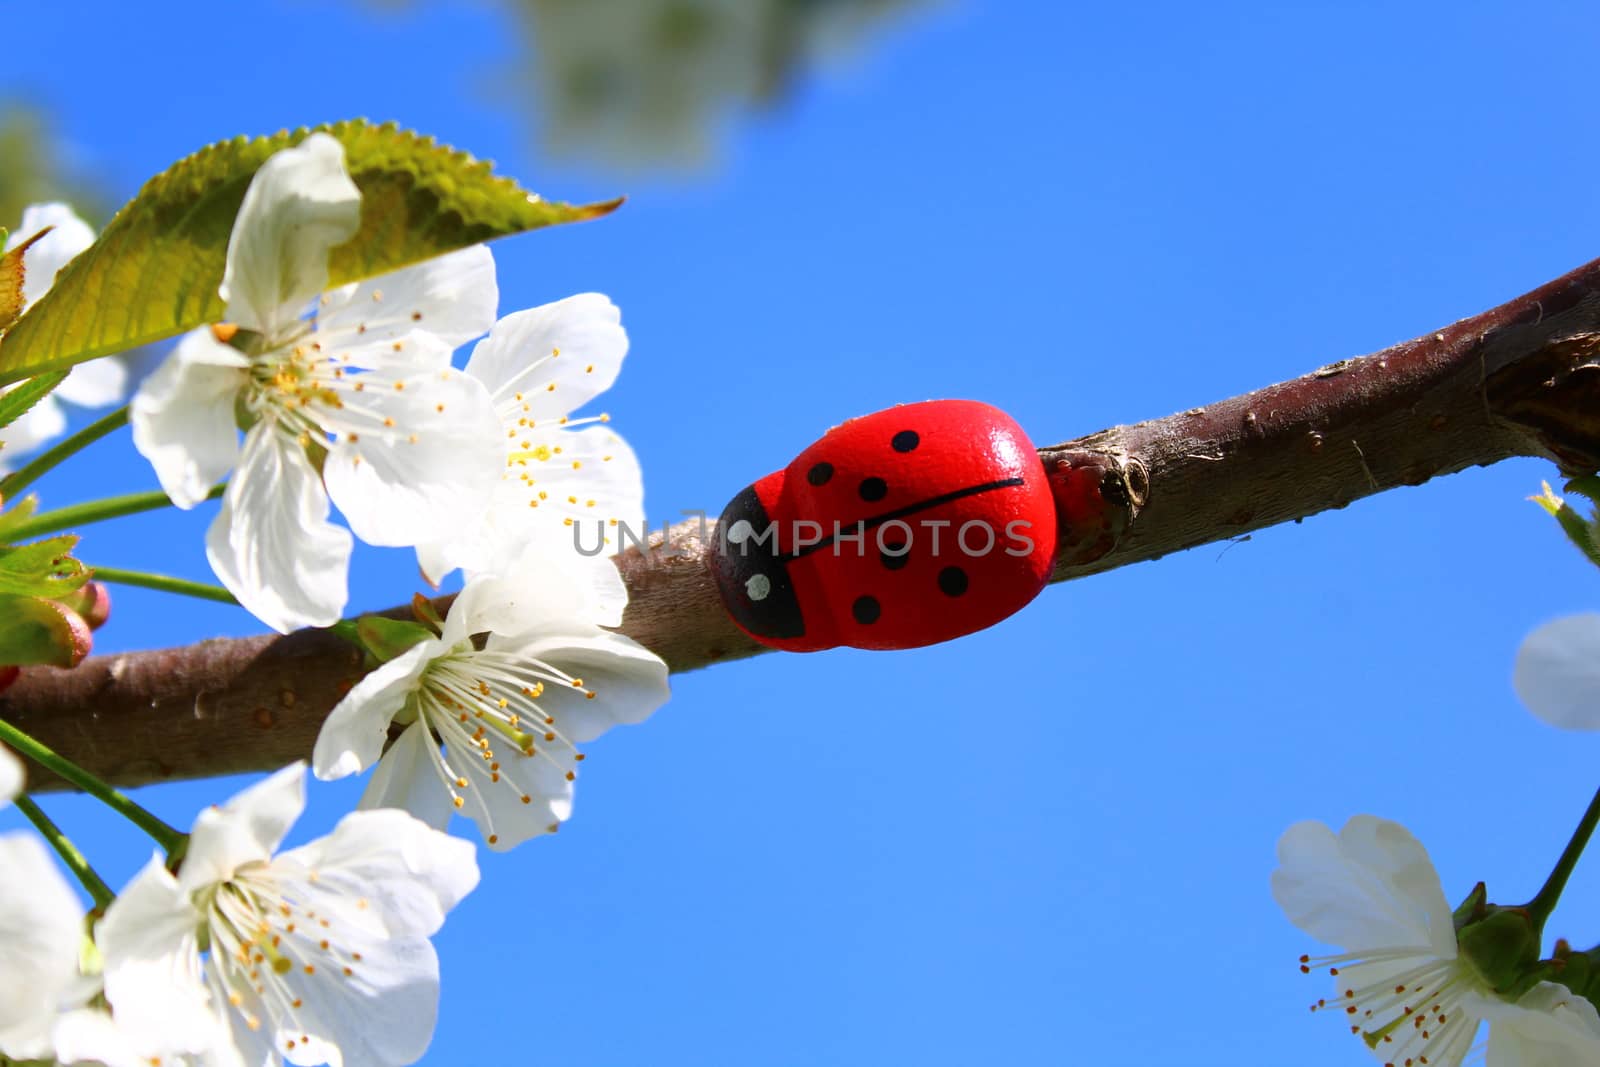 The picture shows a ladybug on a blooming cherry tree.